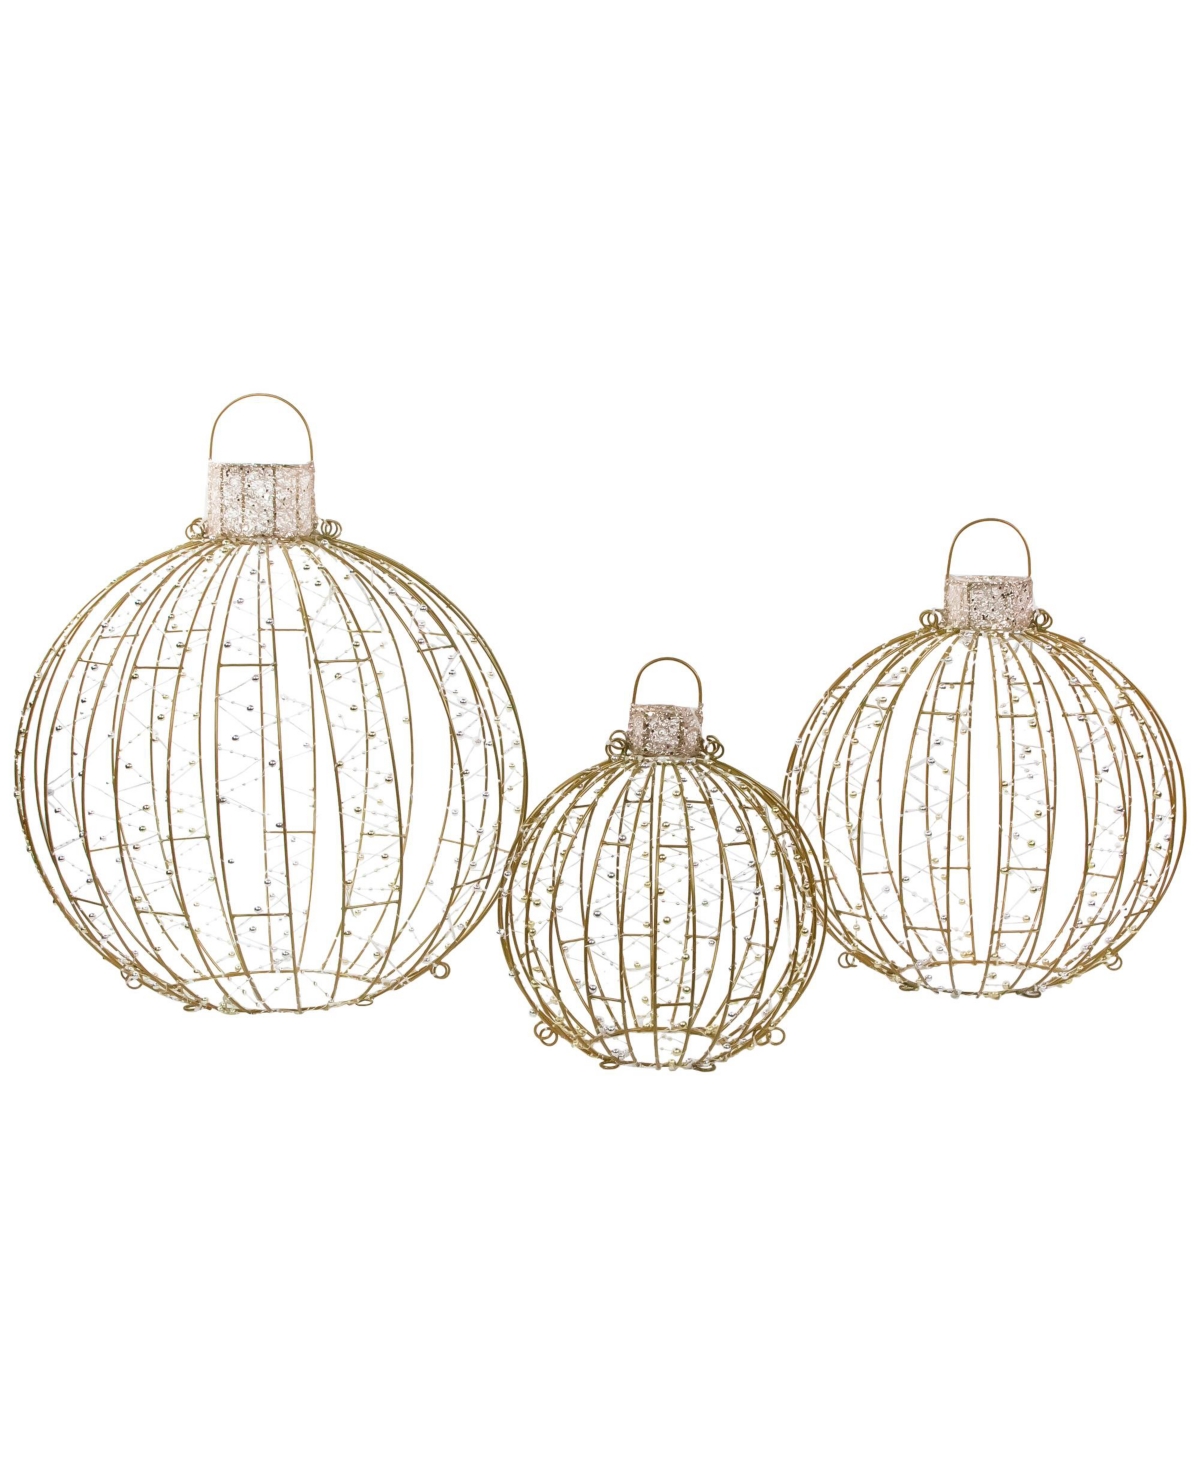 Northlight Led Lighted Ornaments Christmas Yard Decoration, Set Of 3 In Gold-tone